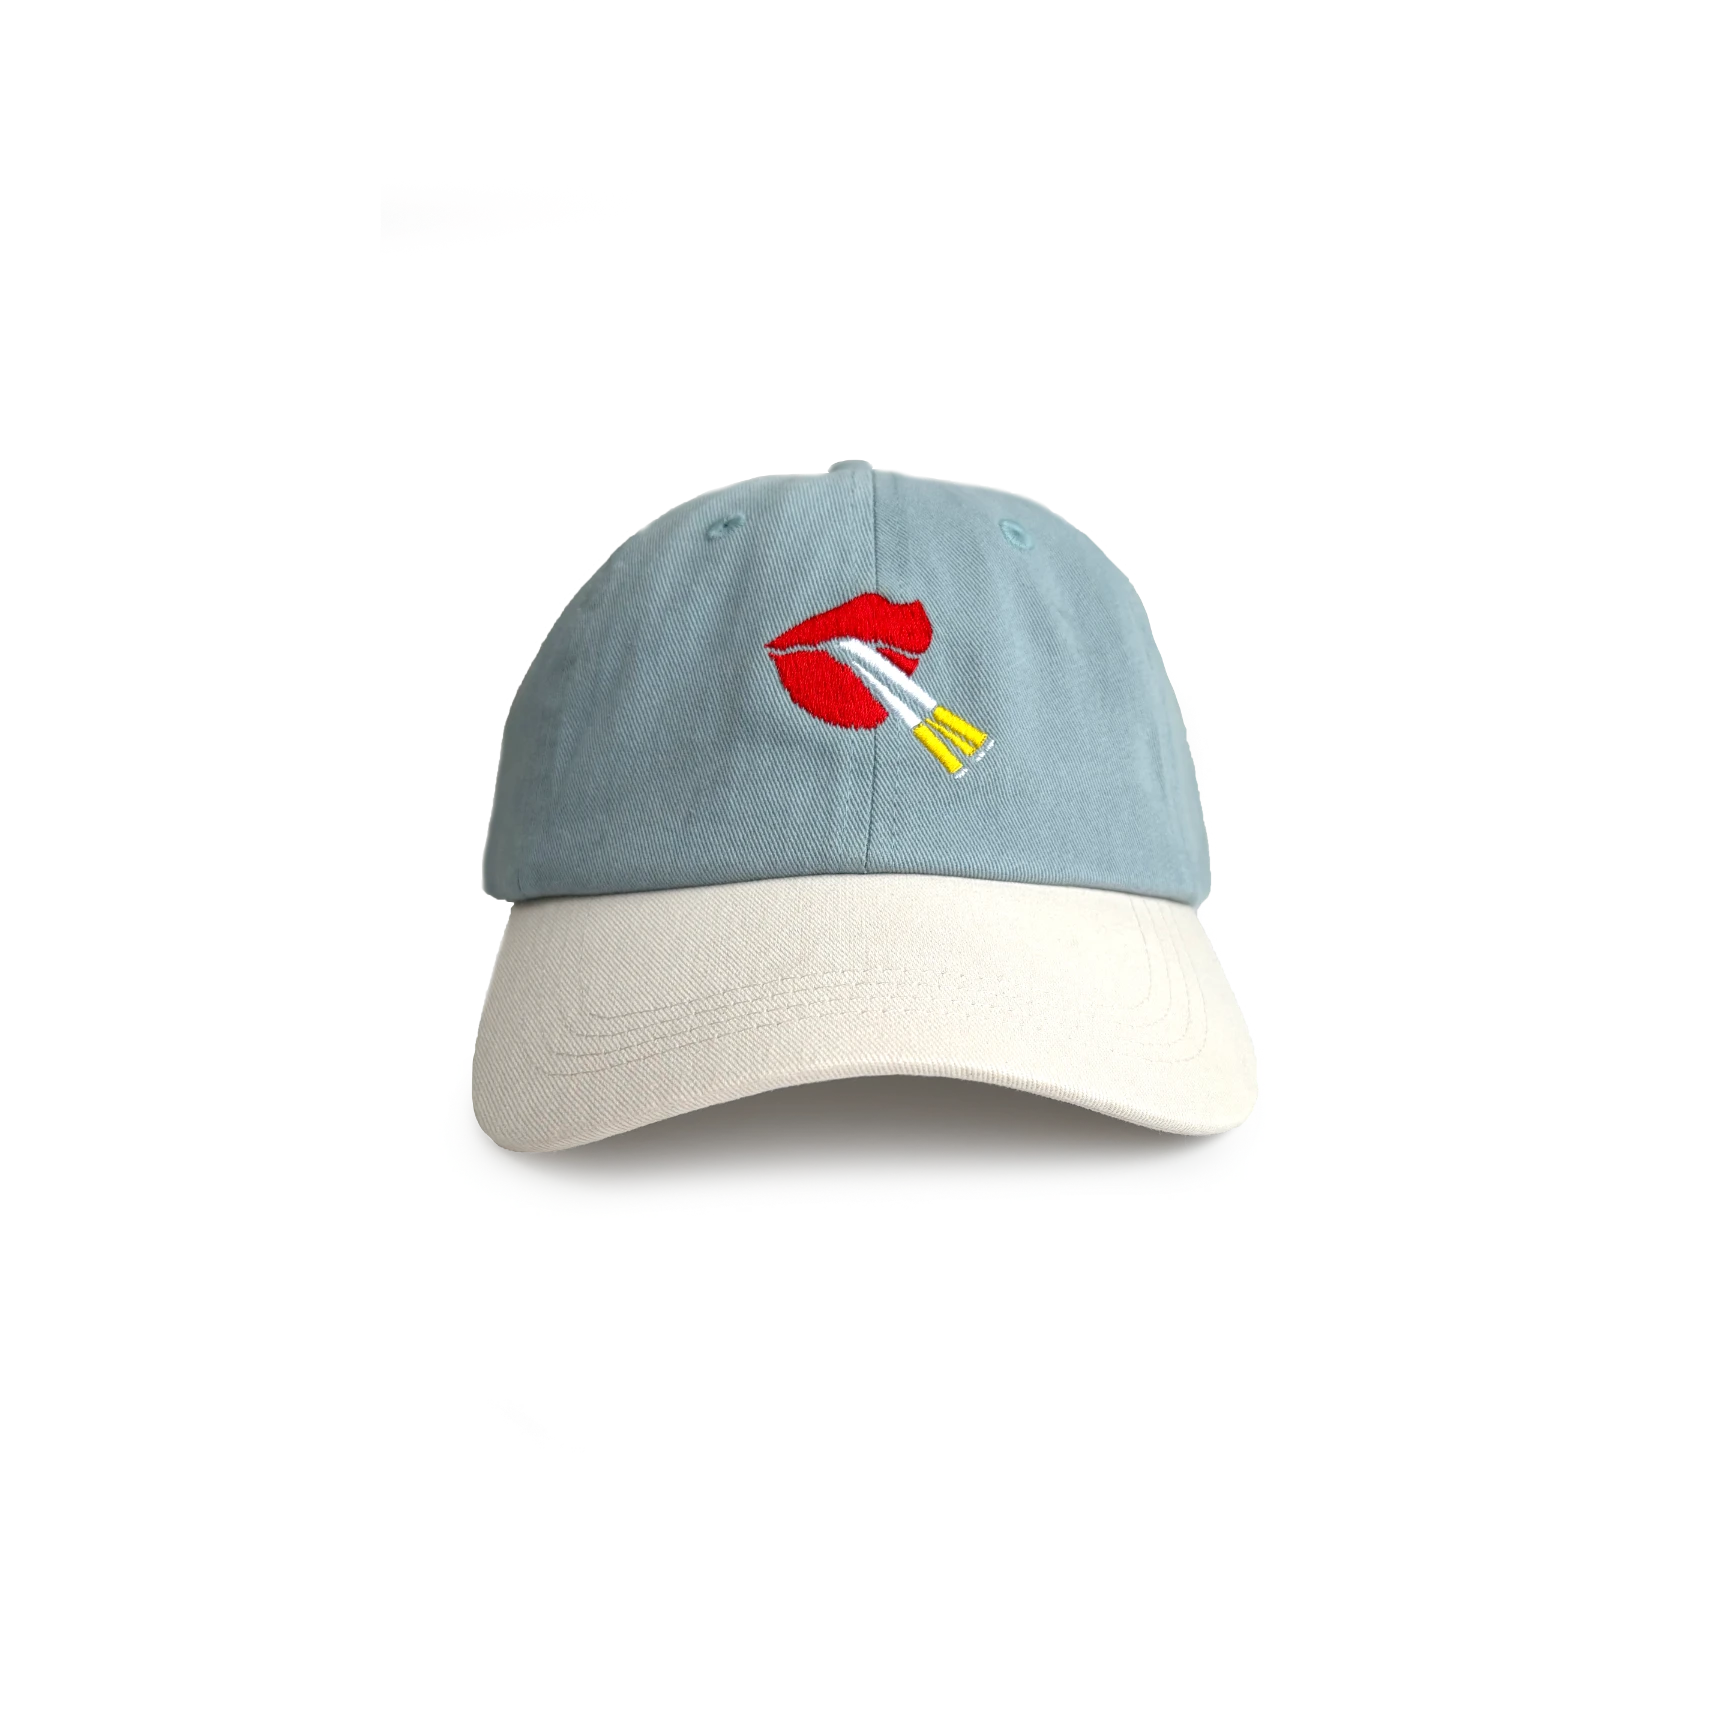 joh-dad_cap_iconic_mouth_FRONT